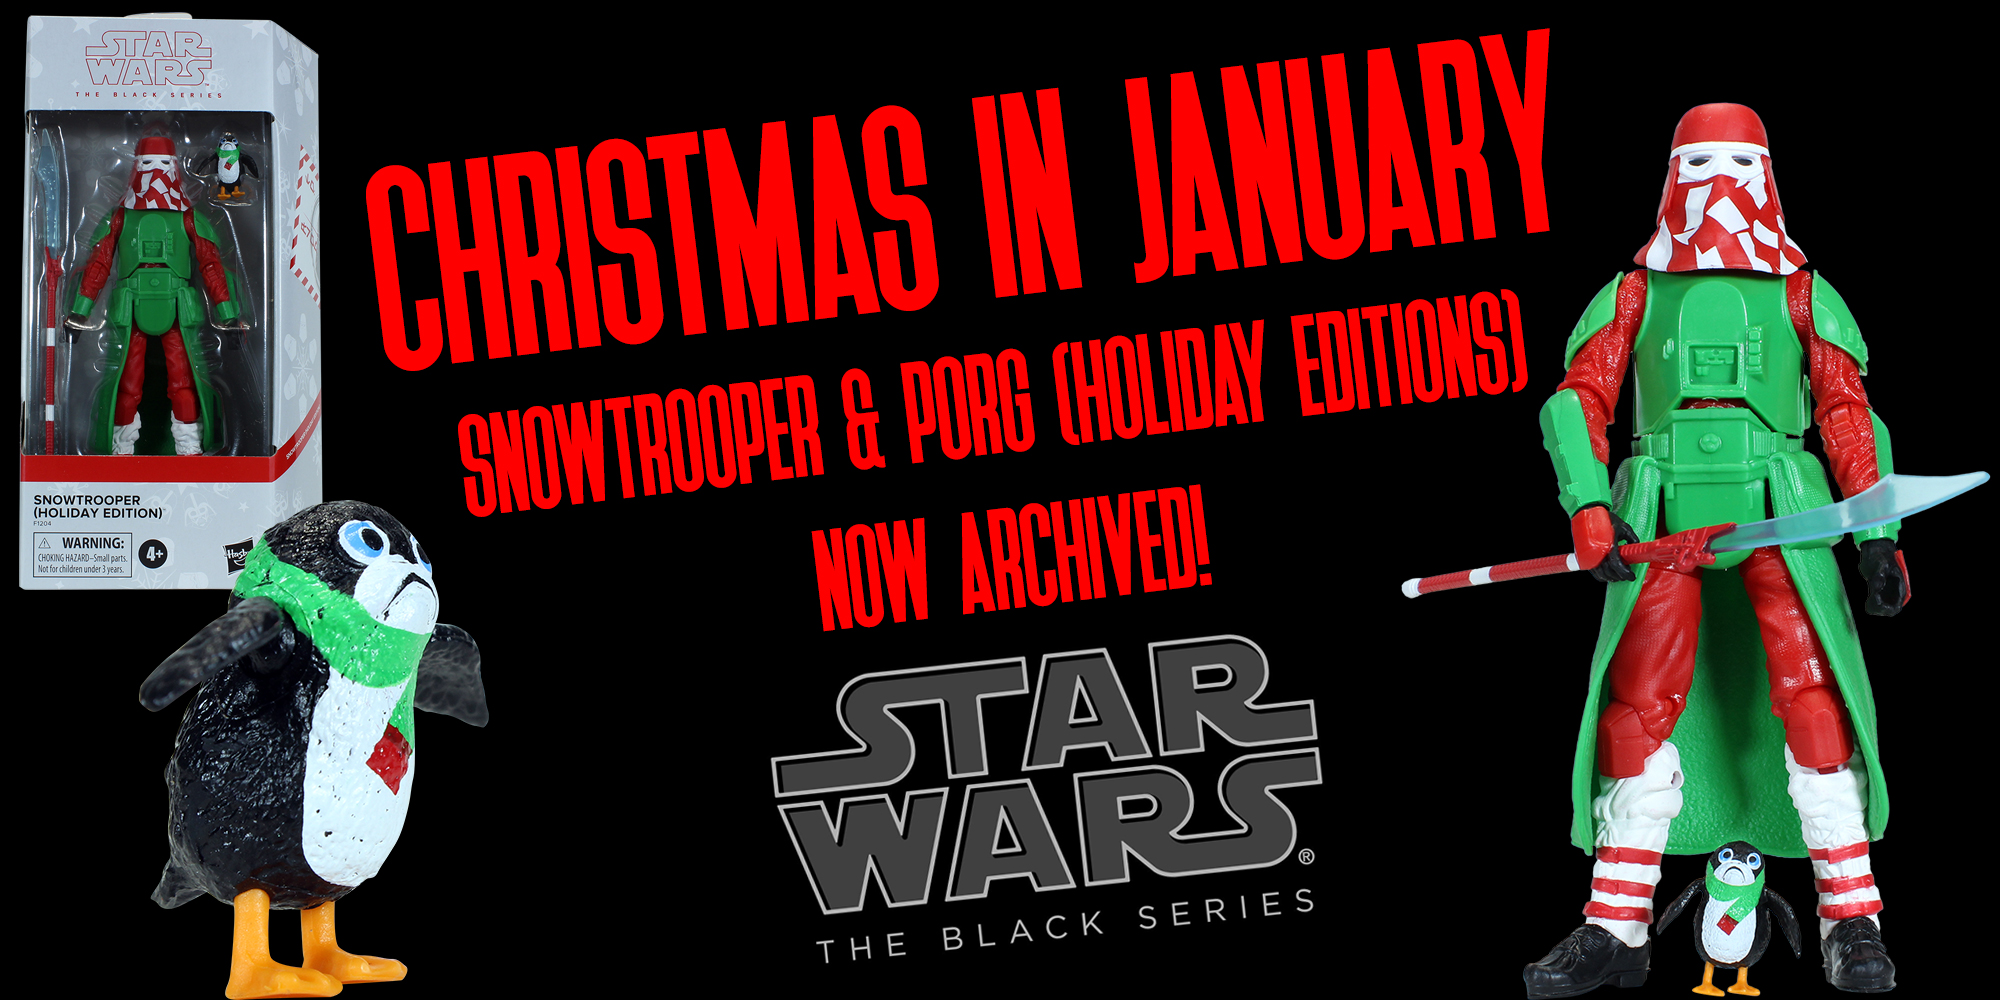 Black Series Snowtrooper And Porg Holiday Editions Added